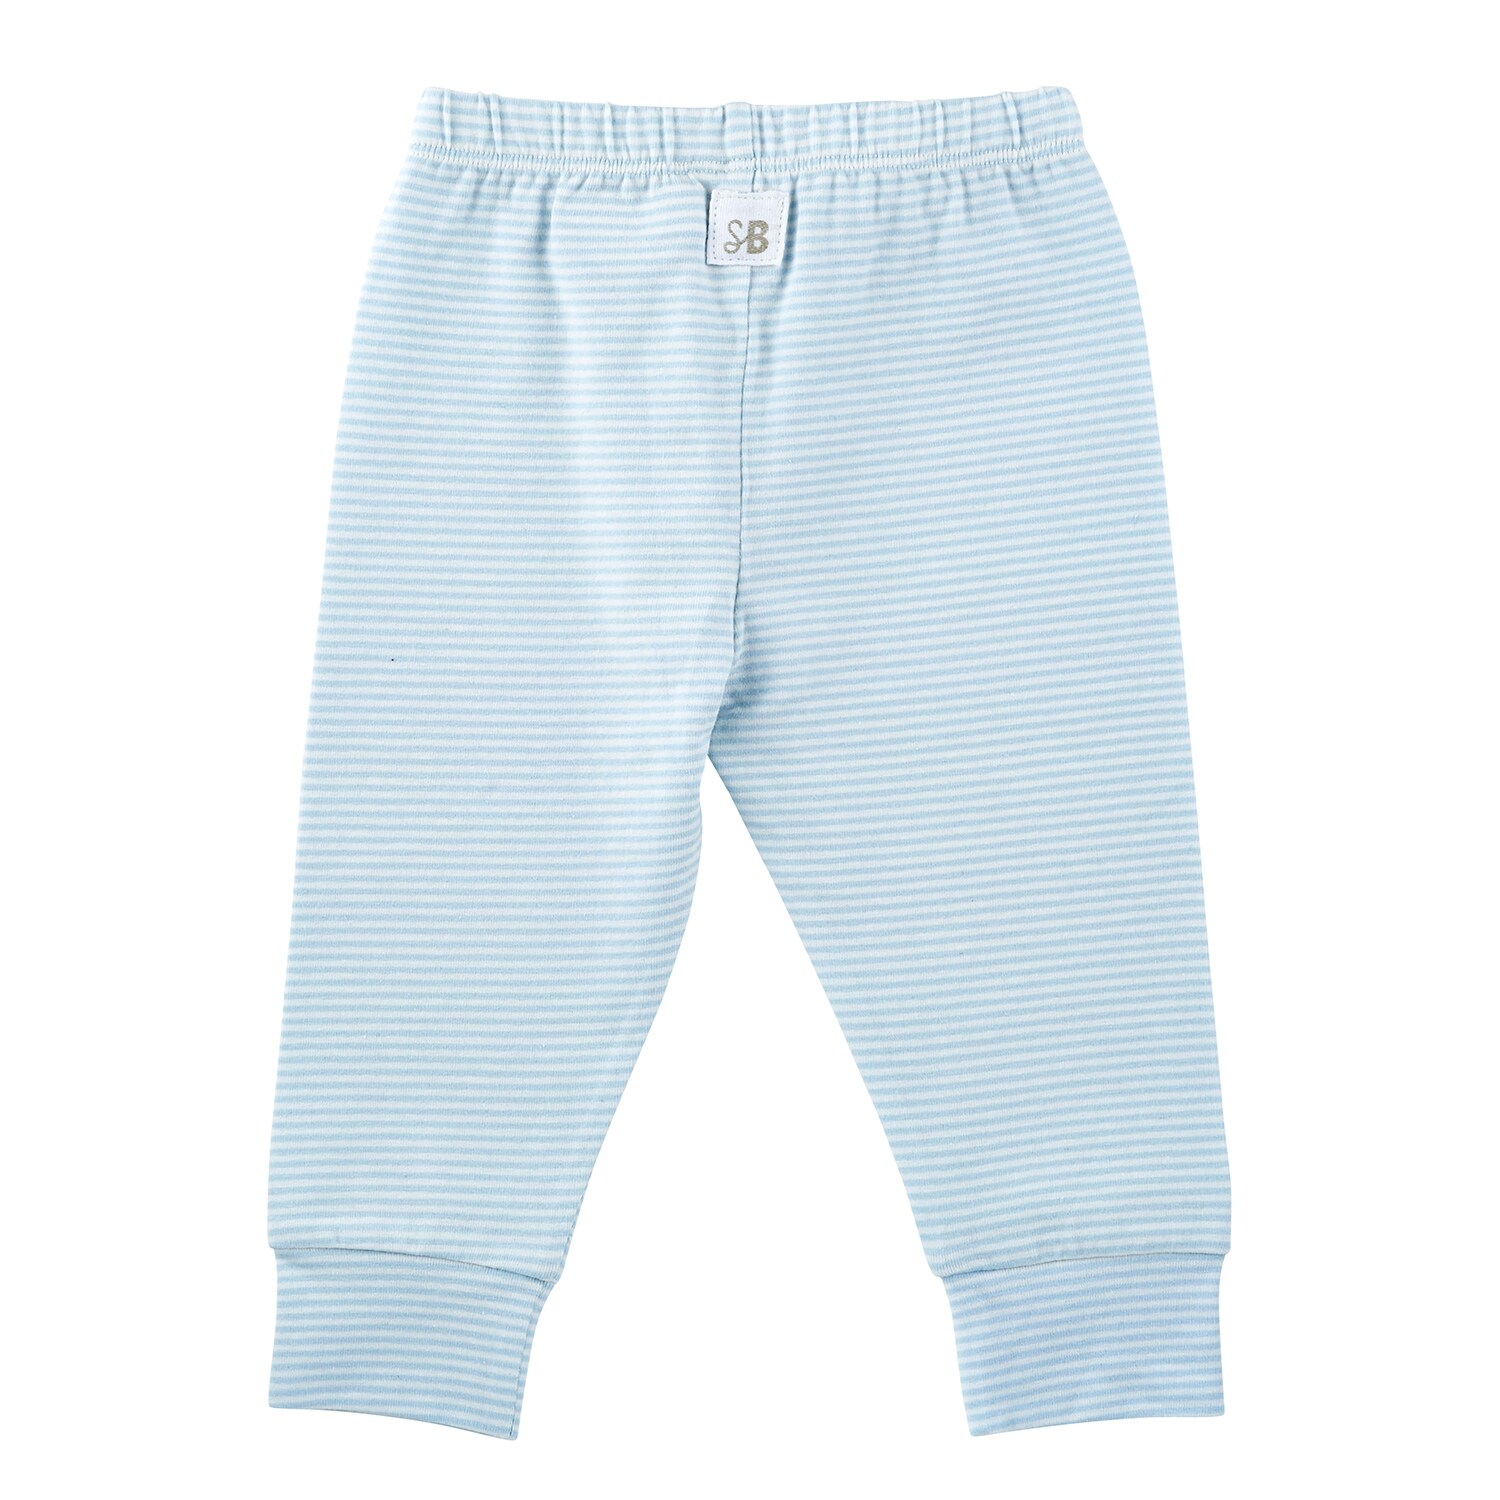 light blue and white striped pants